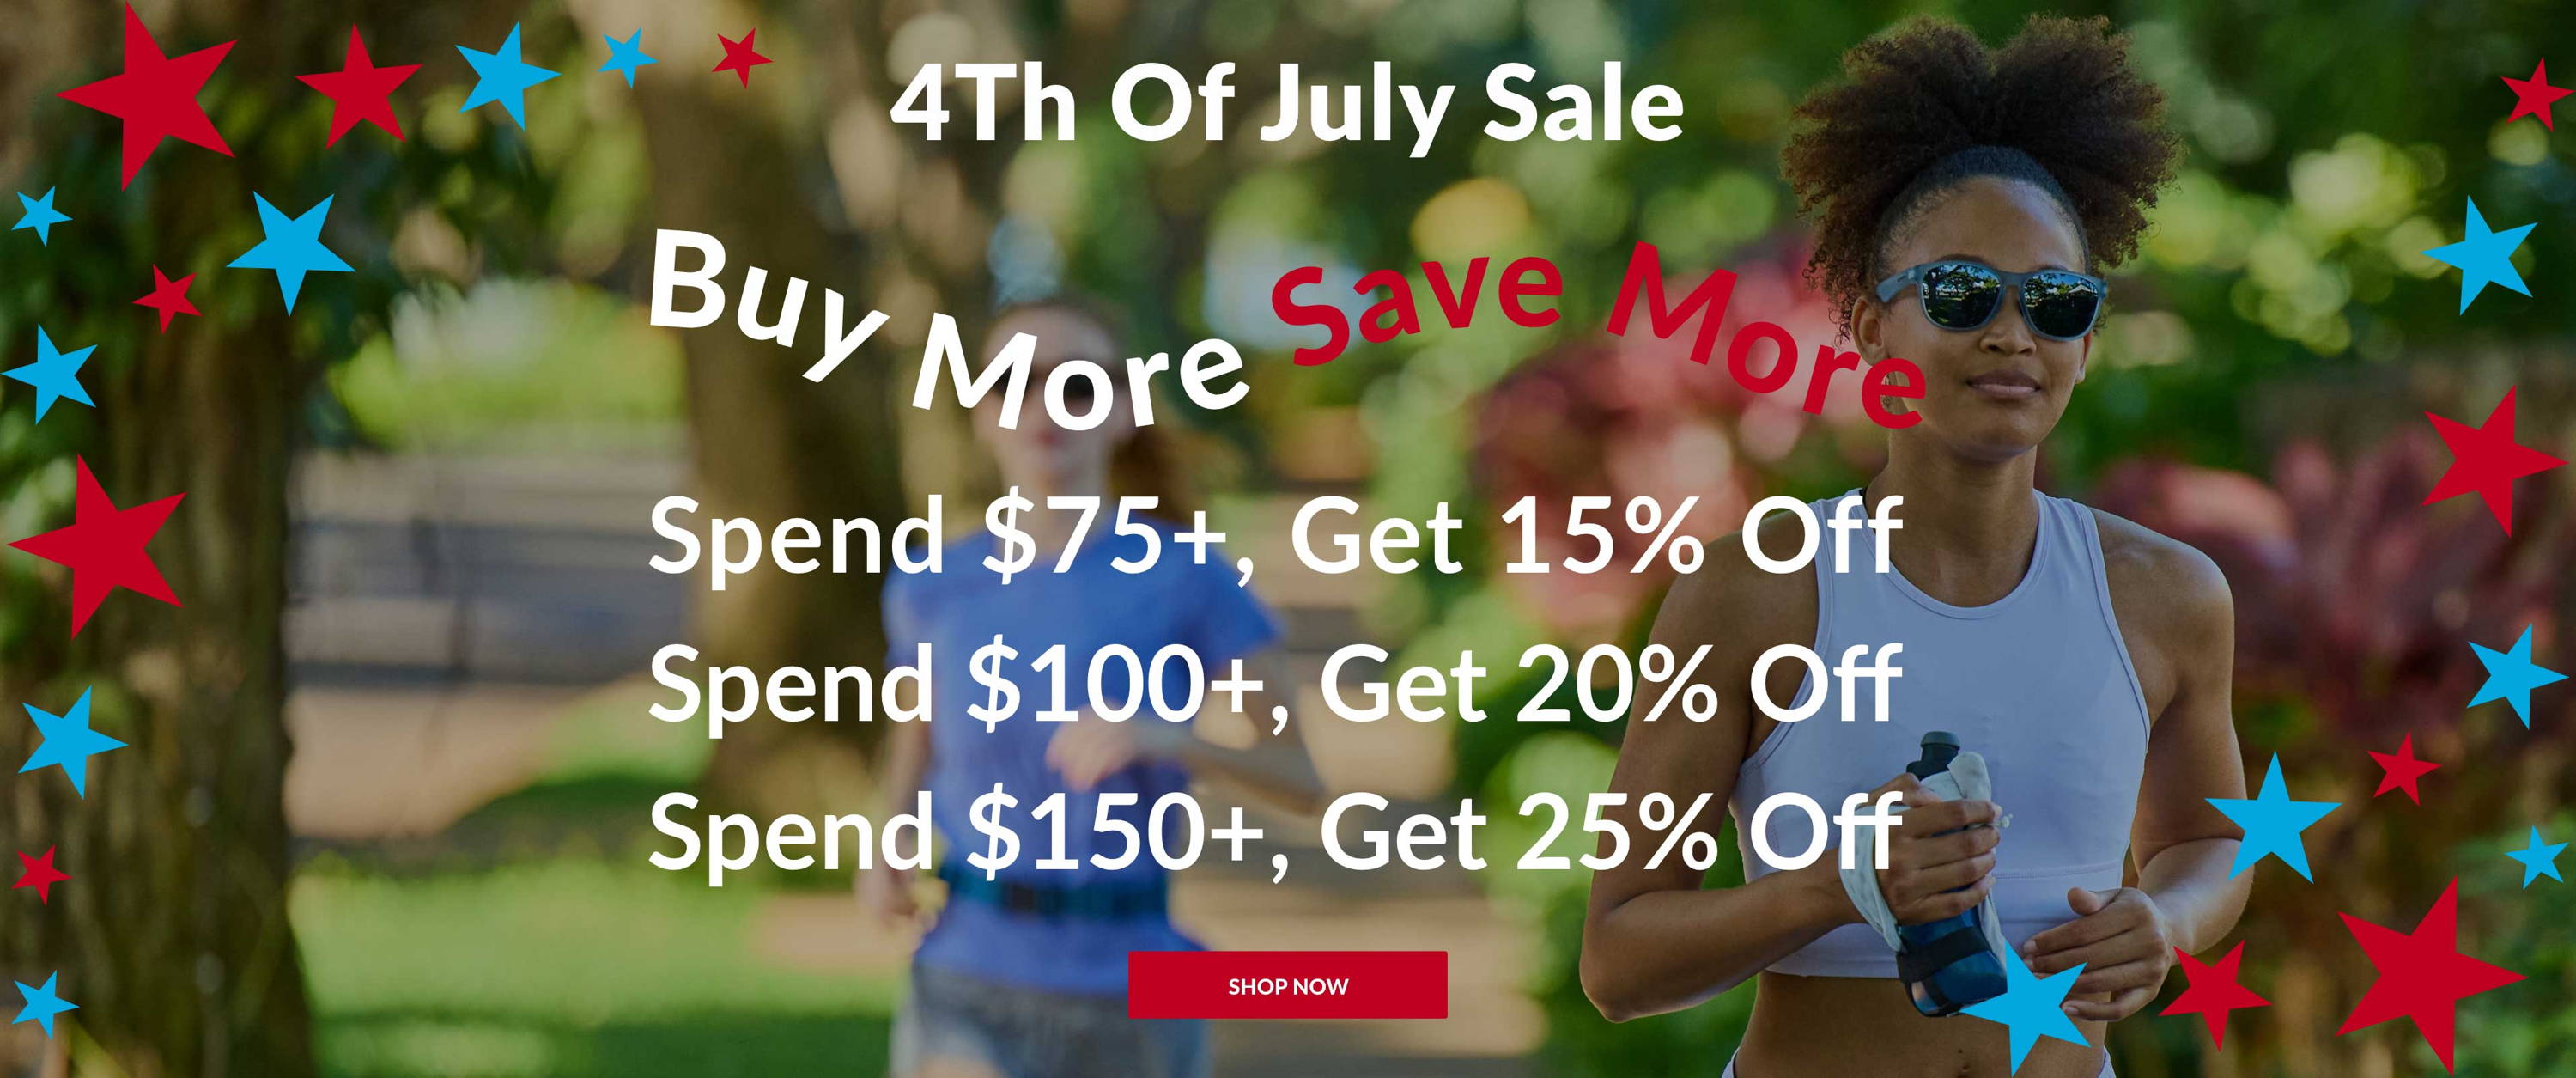 4th of July Sale - Buy More Save More - Spend $75+, Get 15% Off, Spend $100+, Get 20% Off, Spend $150+, Get 25% Off - Shop Now